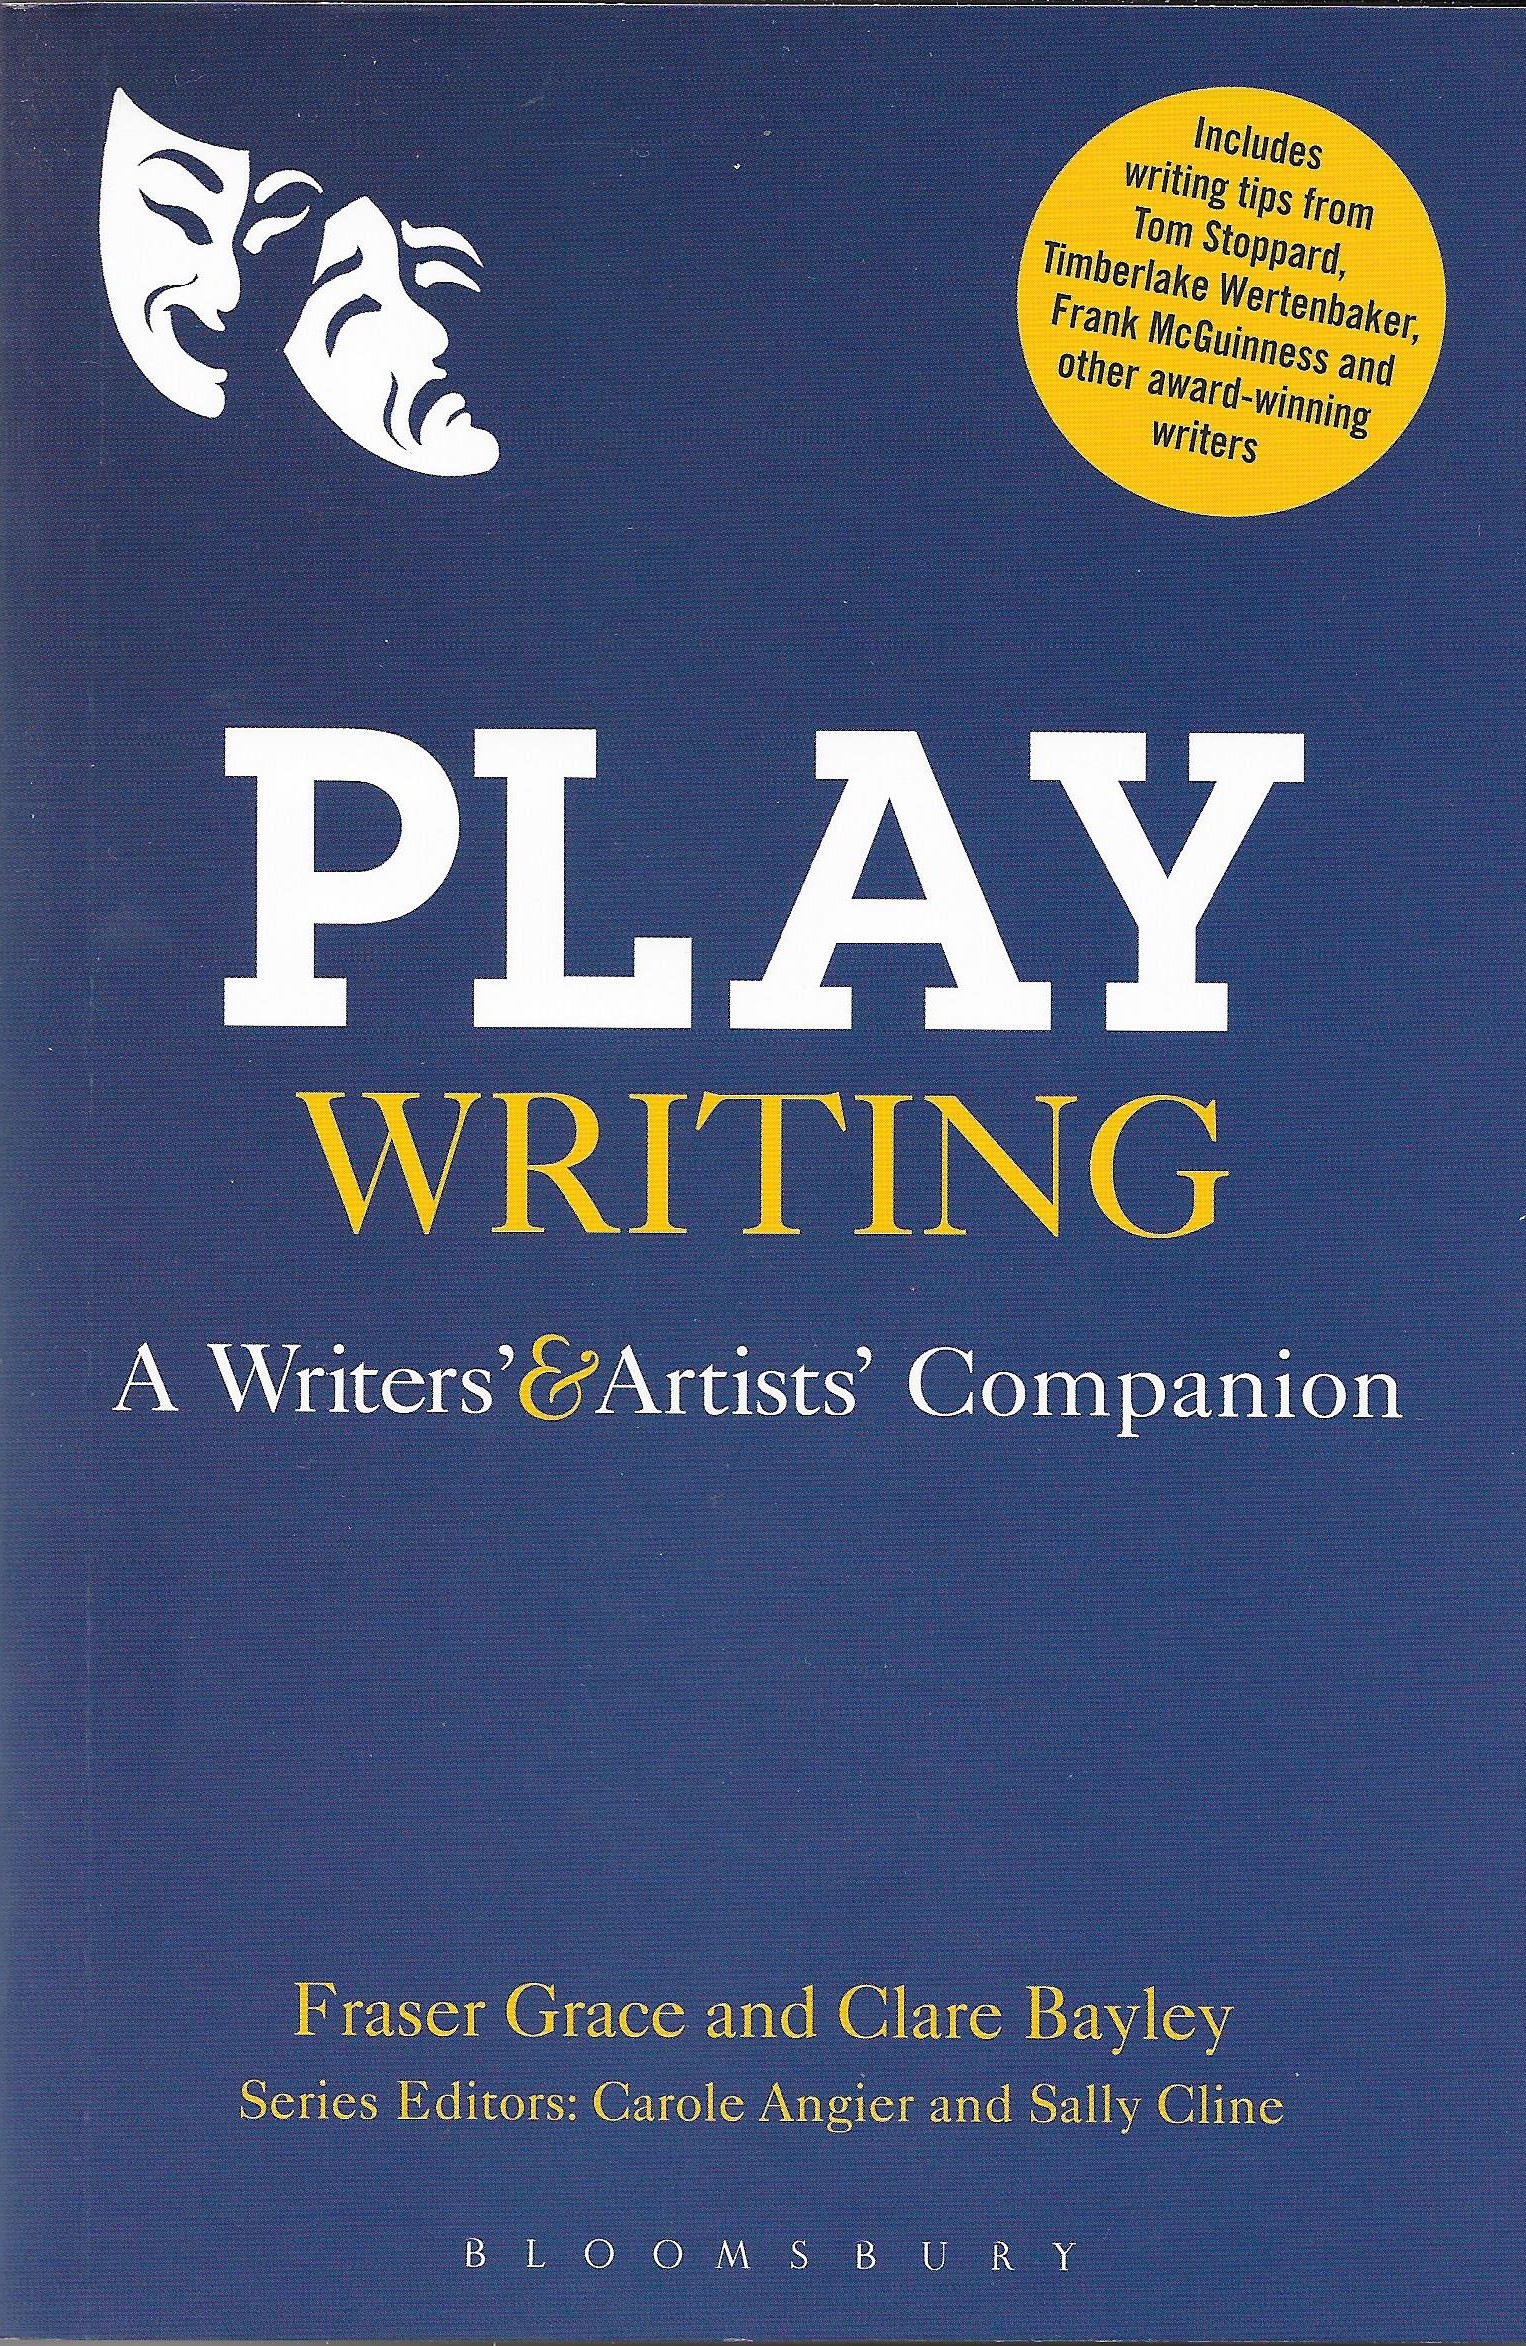 BOOK REVIEW: Playwriting – a Writers & Artists Companion